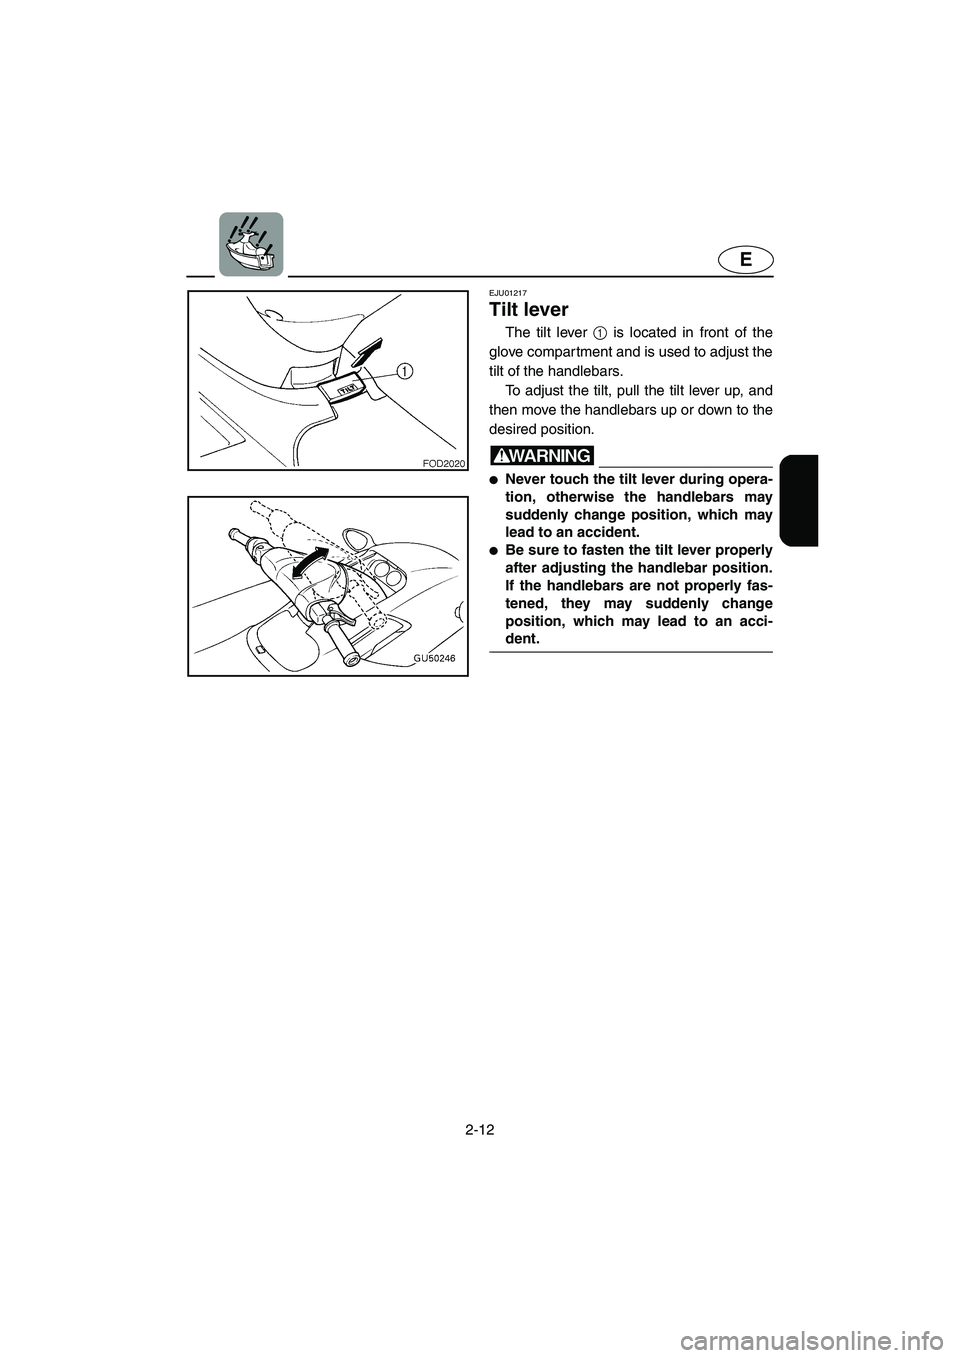 YAMAHA SUV 1200 2003 Owners Guide 2-12
E
EJU01217 
Tilt lever  
The tilt lever 1 is located in front of the
glove compartment and is used to adjust the
tilt of the handlebars. 
To adjust the tilt, pull the tilt lever up, and
then move